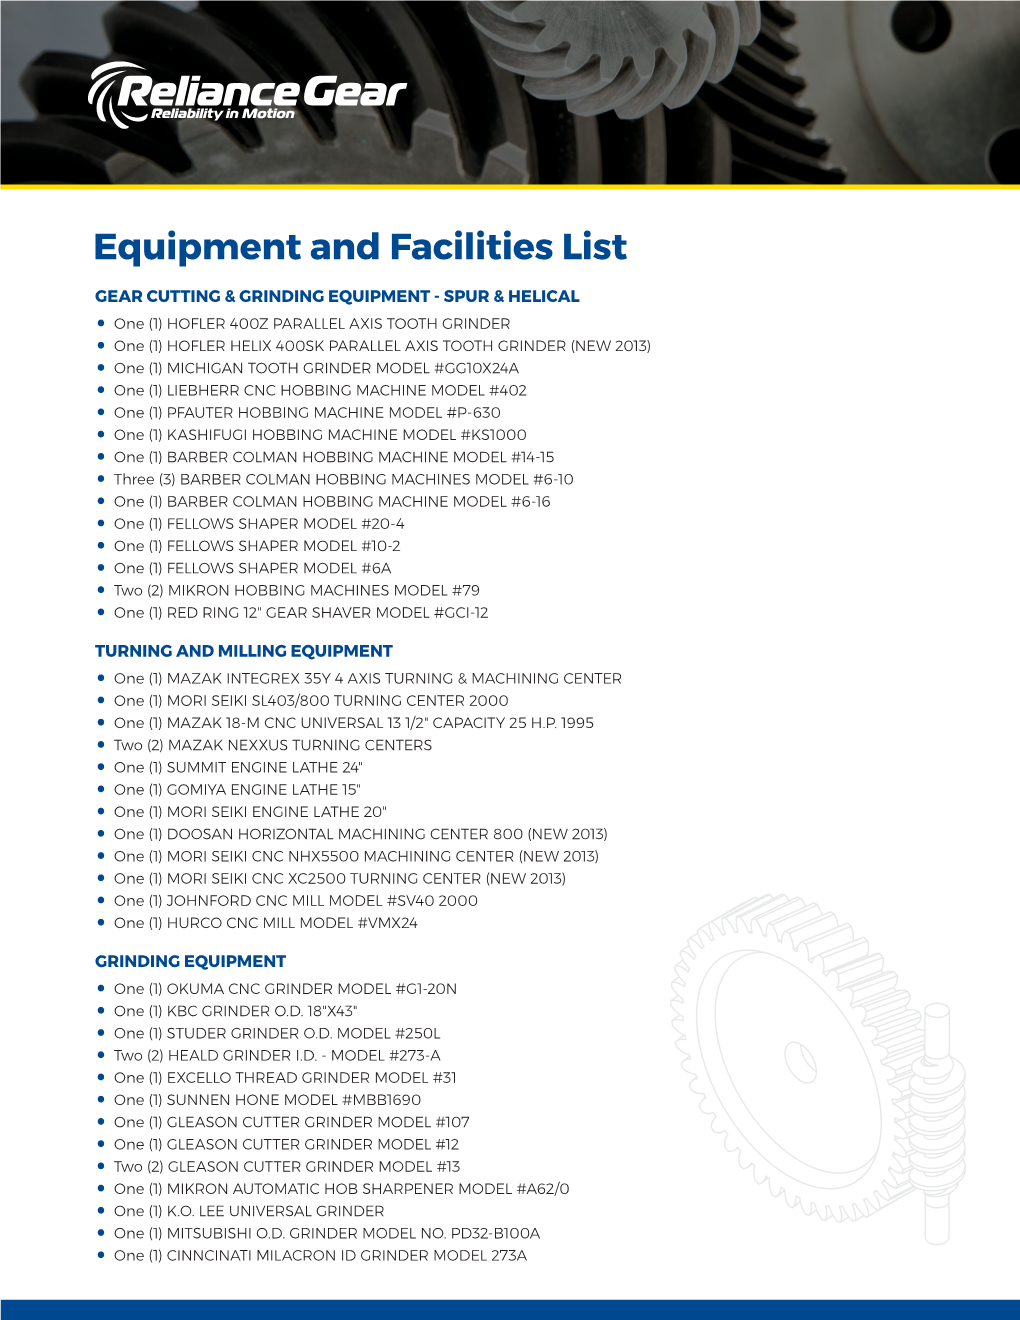 Equipment and Facilities List